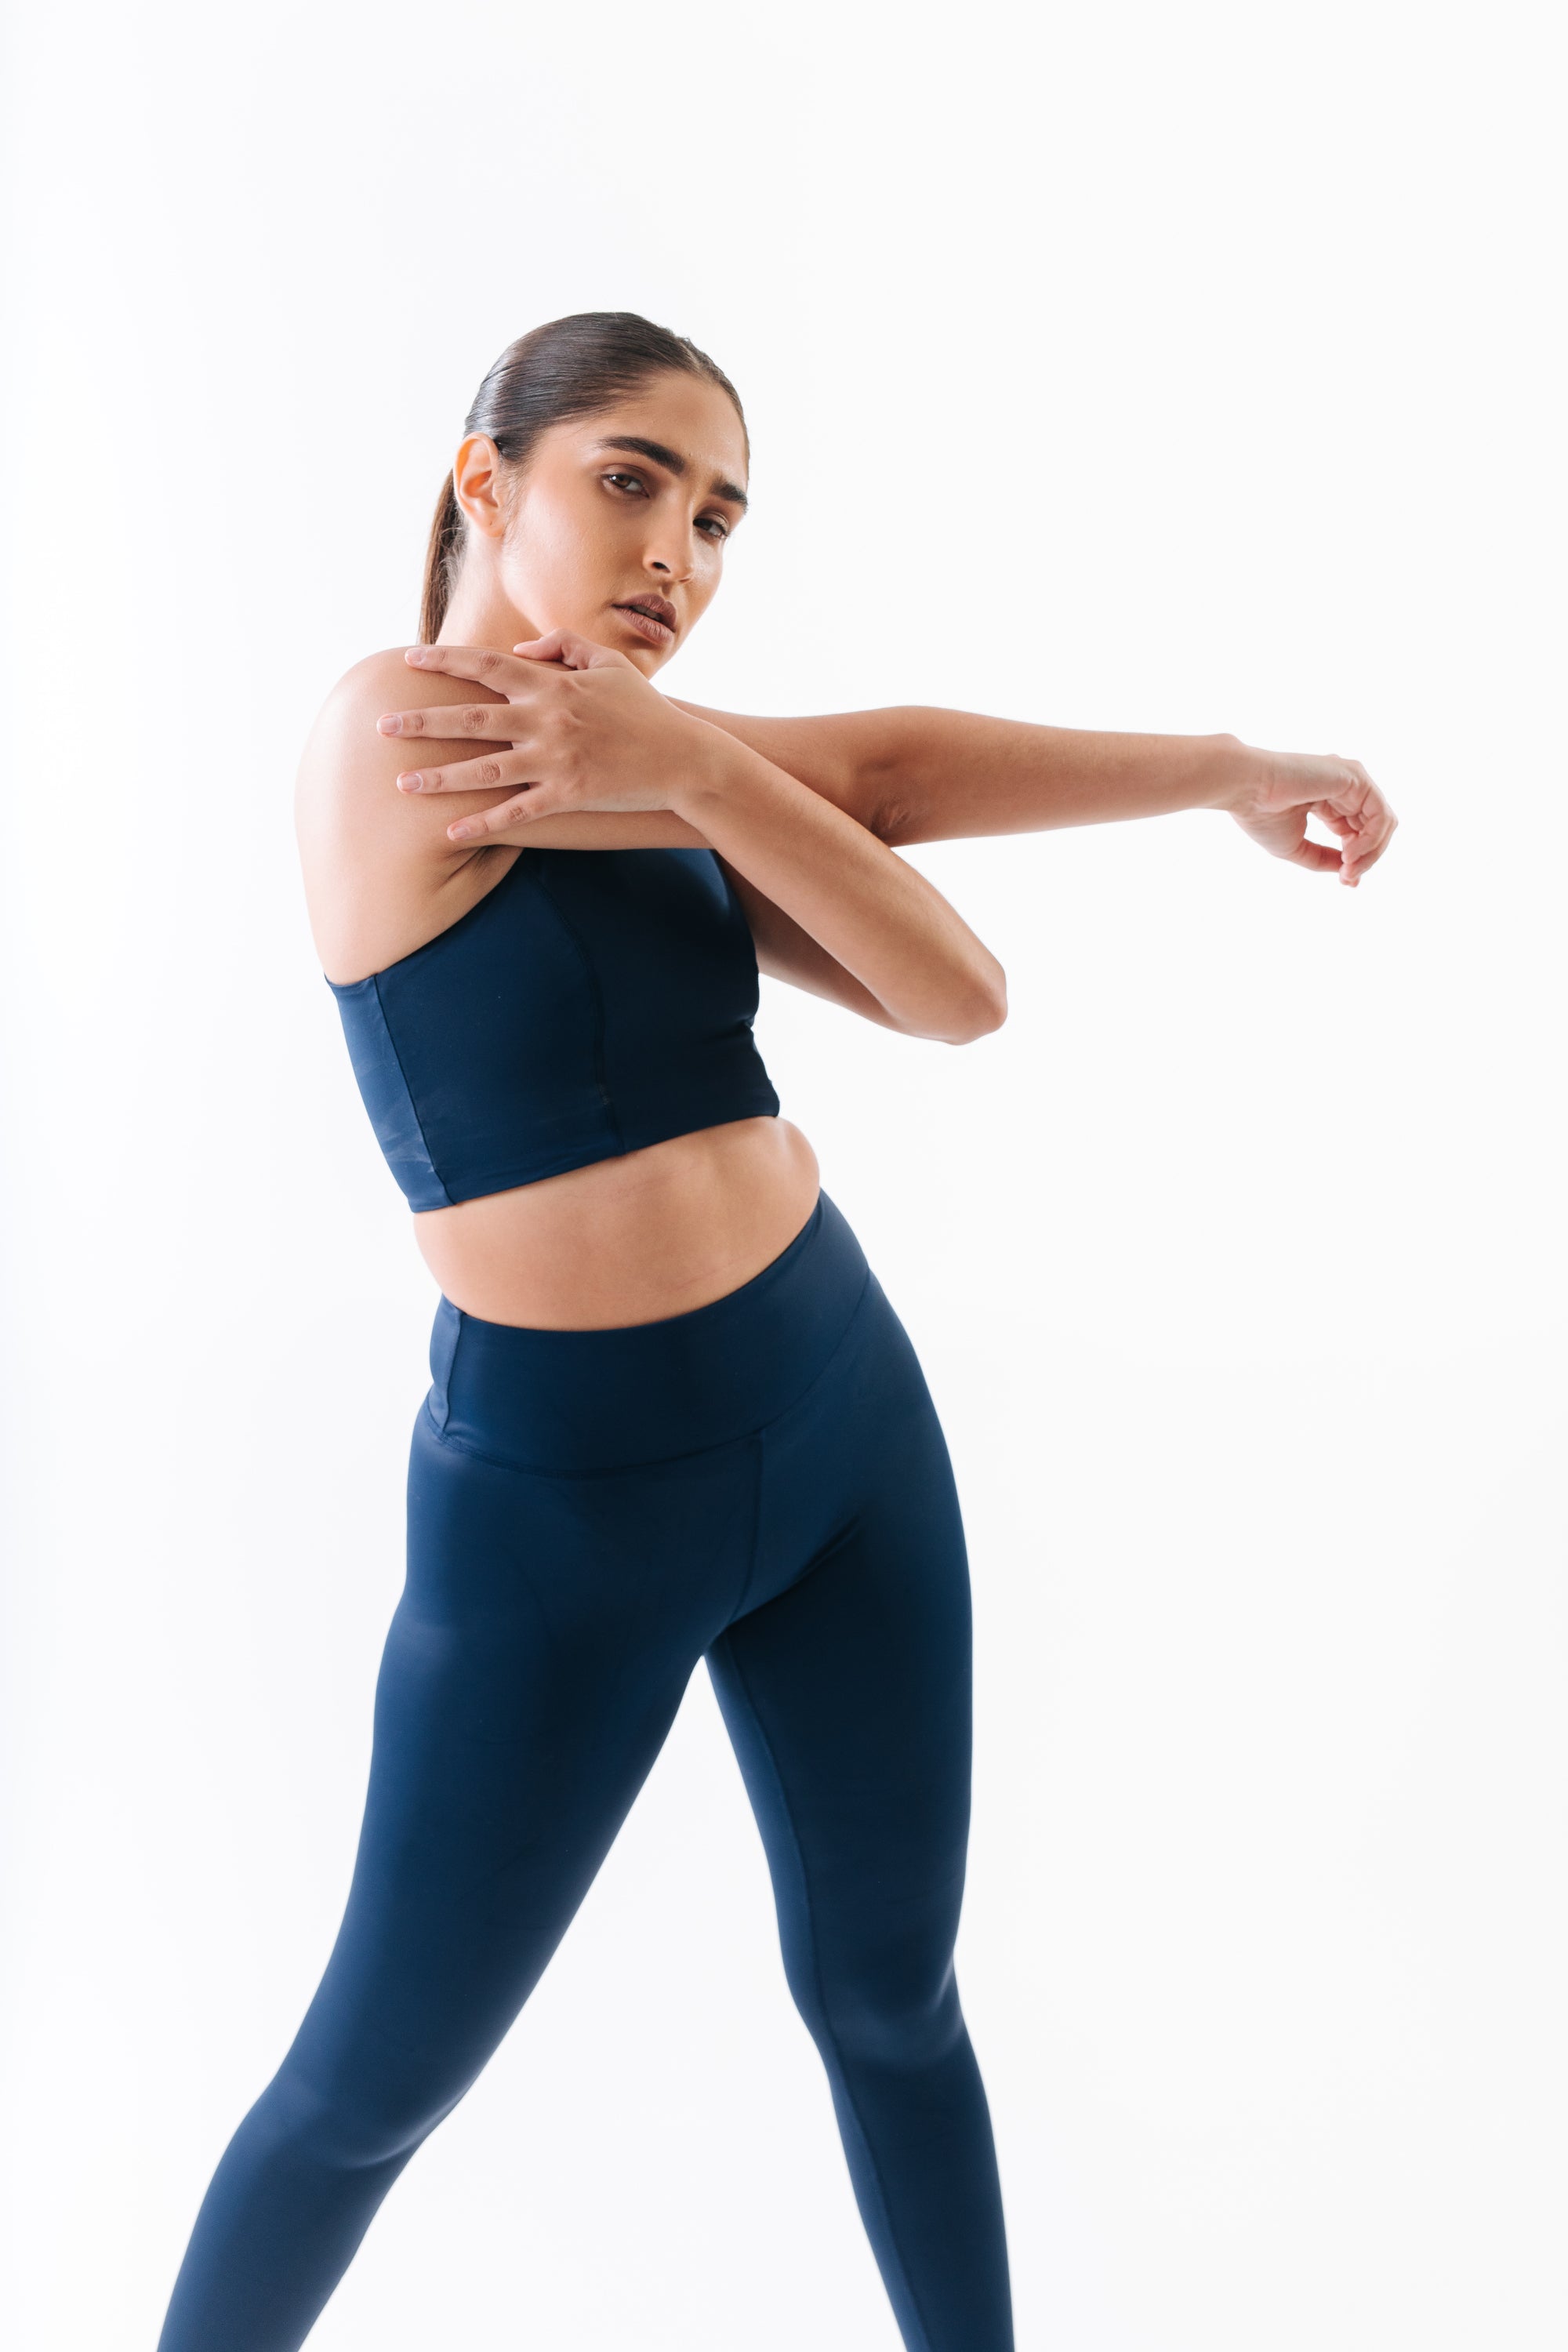 Women's Activewear, Sports Bras and Leggings